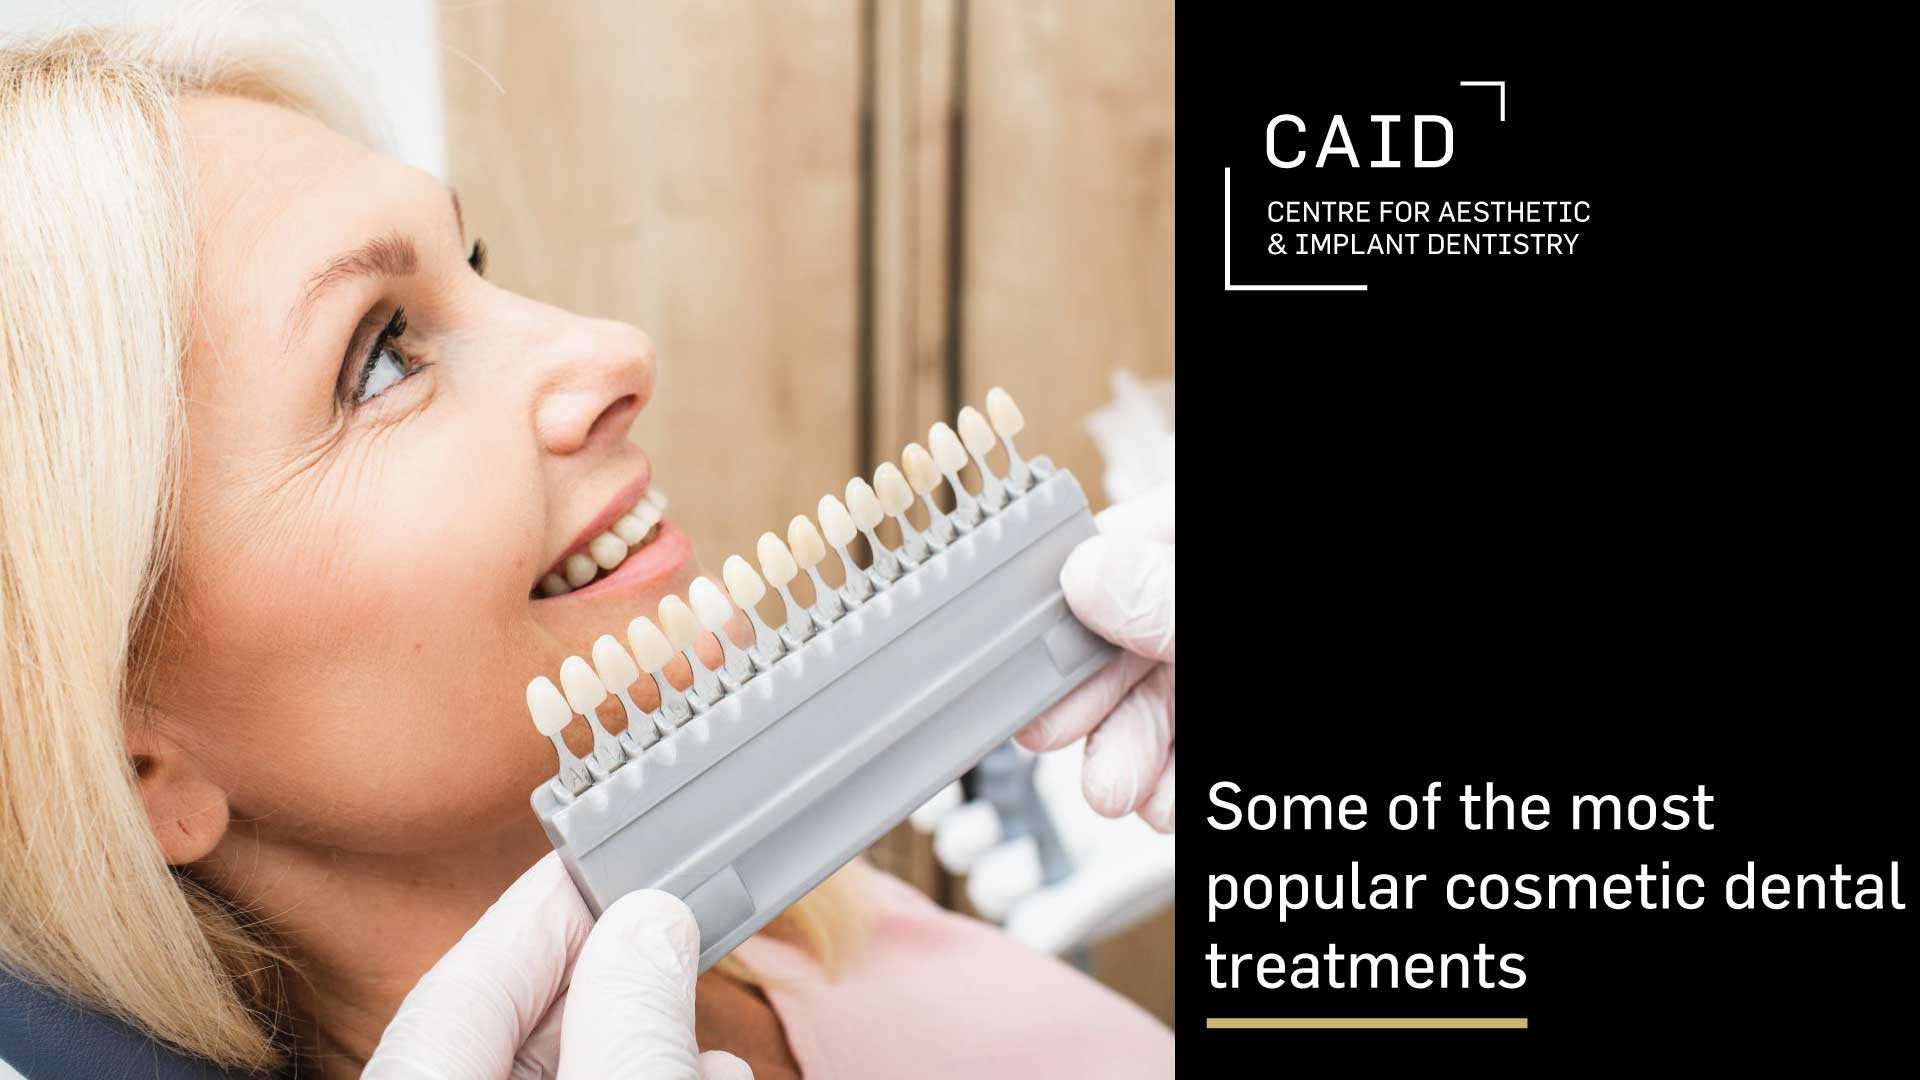 What are some of the most popular cosmetic dental treatments?